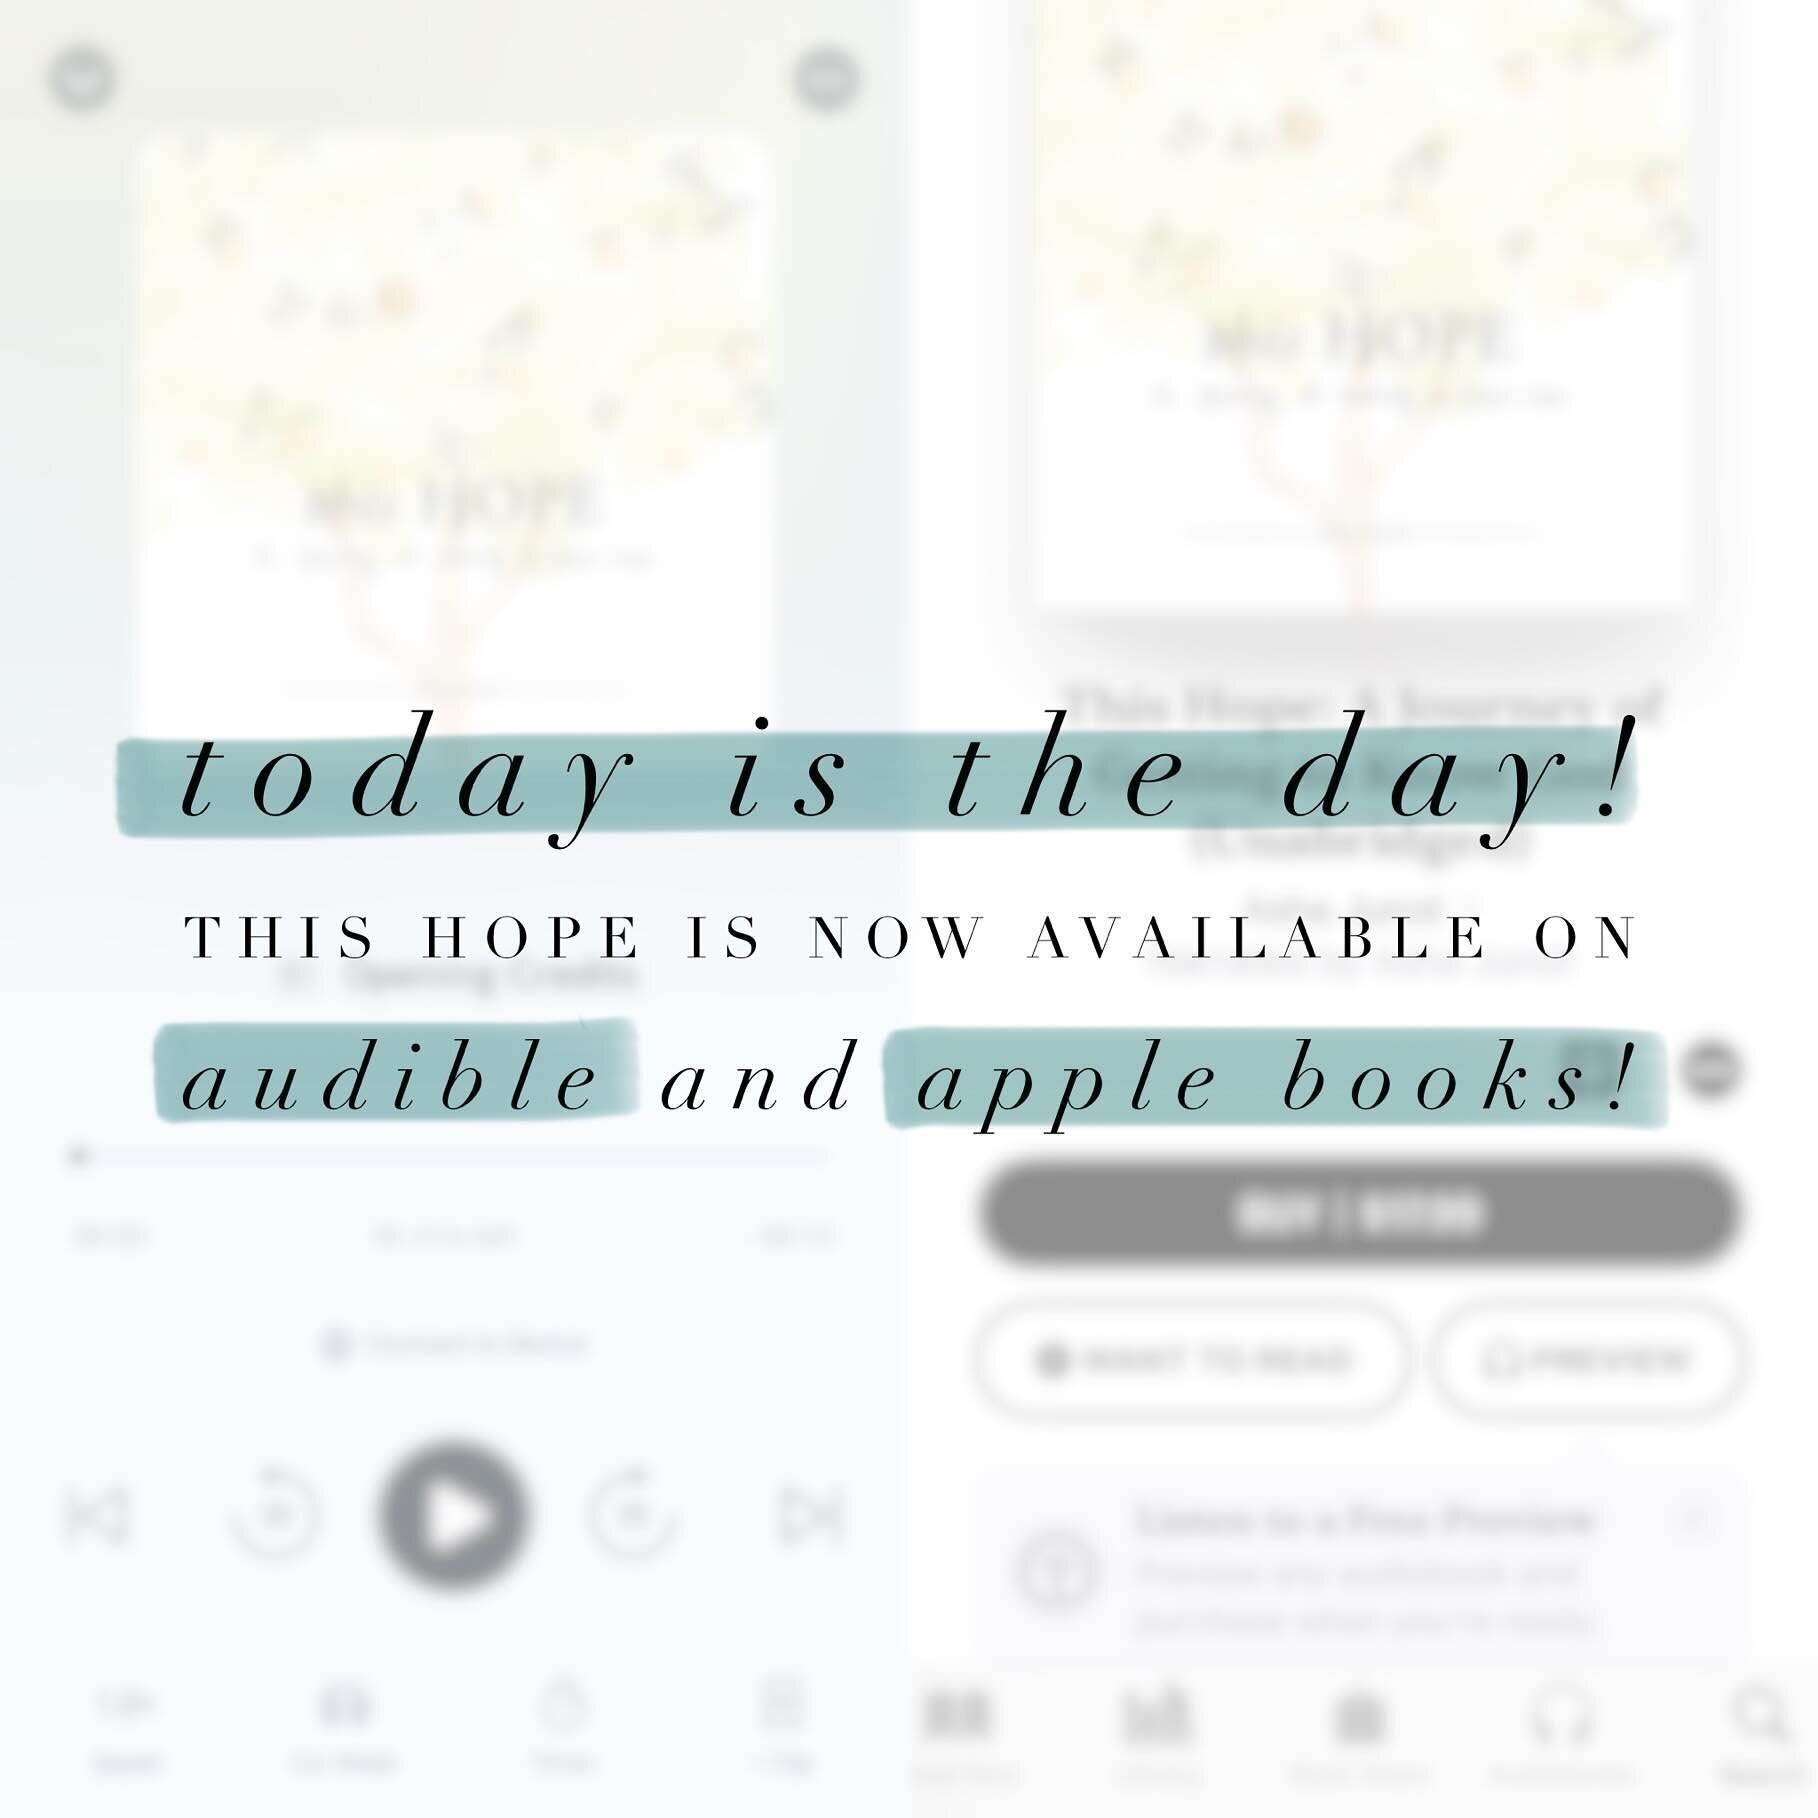 This release has me weepy, y&rsquo;all. And I don&rsquo;t even know if I have the exact words to explain why. But there&rsquo;s just something about a thing happening when you never thought it would. There&rsquo;s a sweet relief that maybe even means